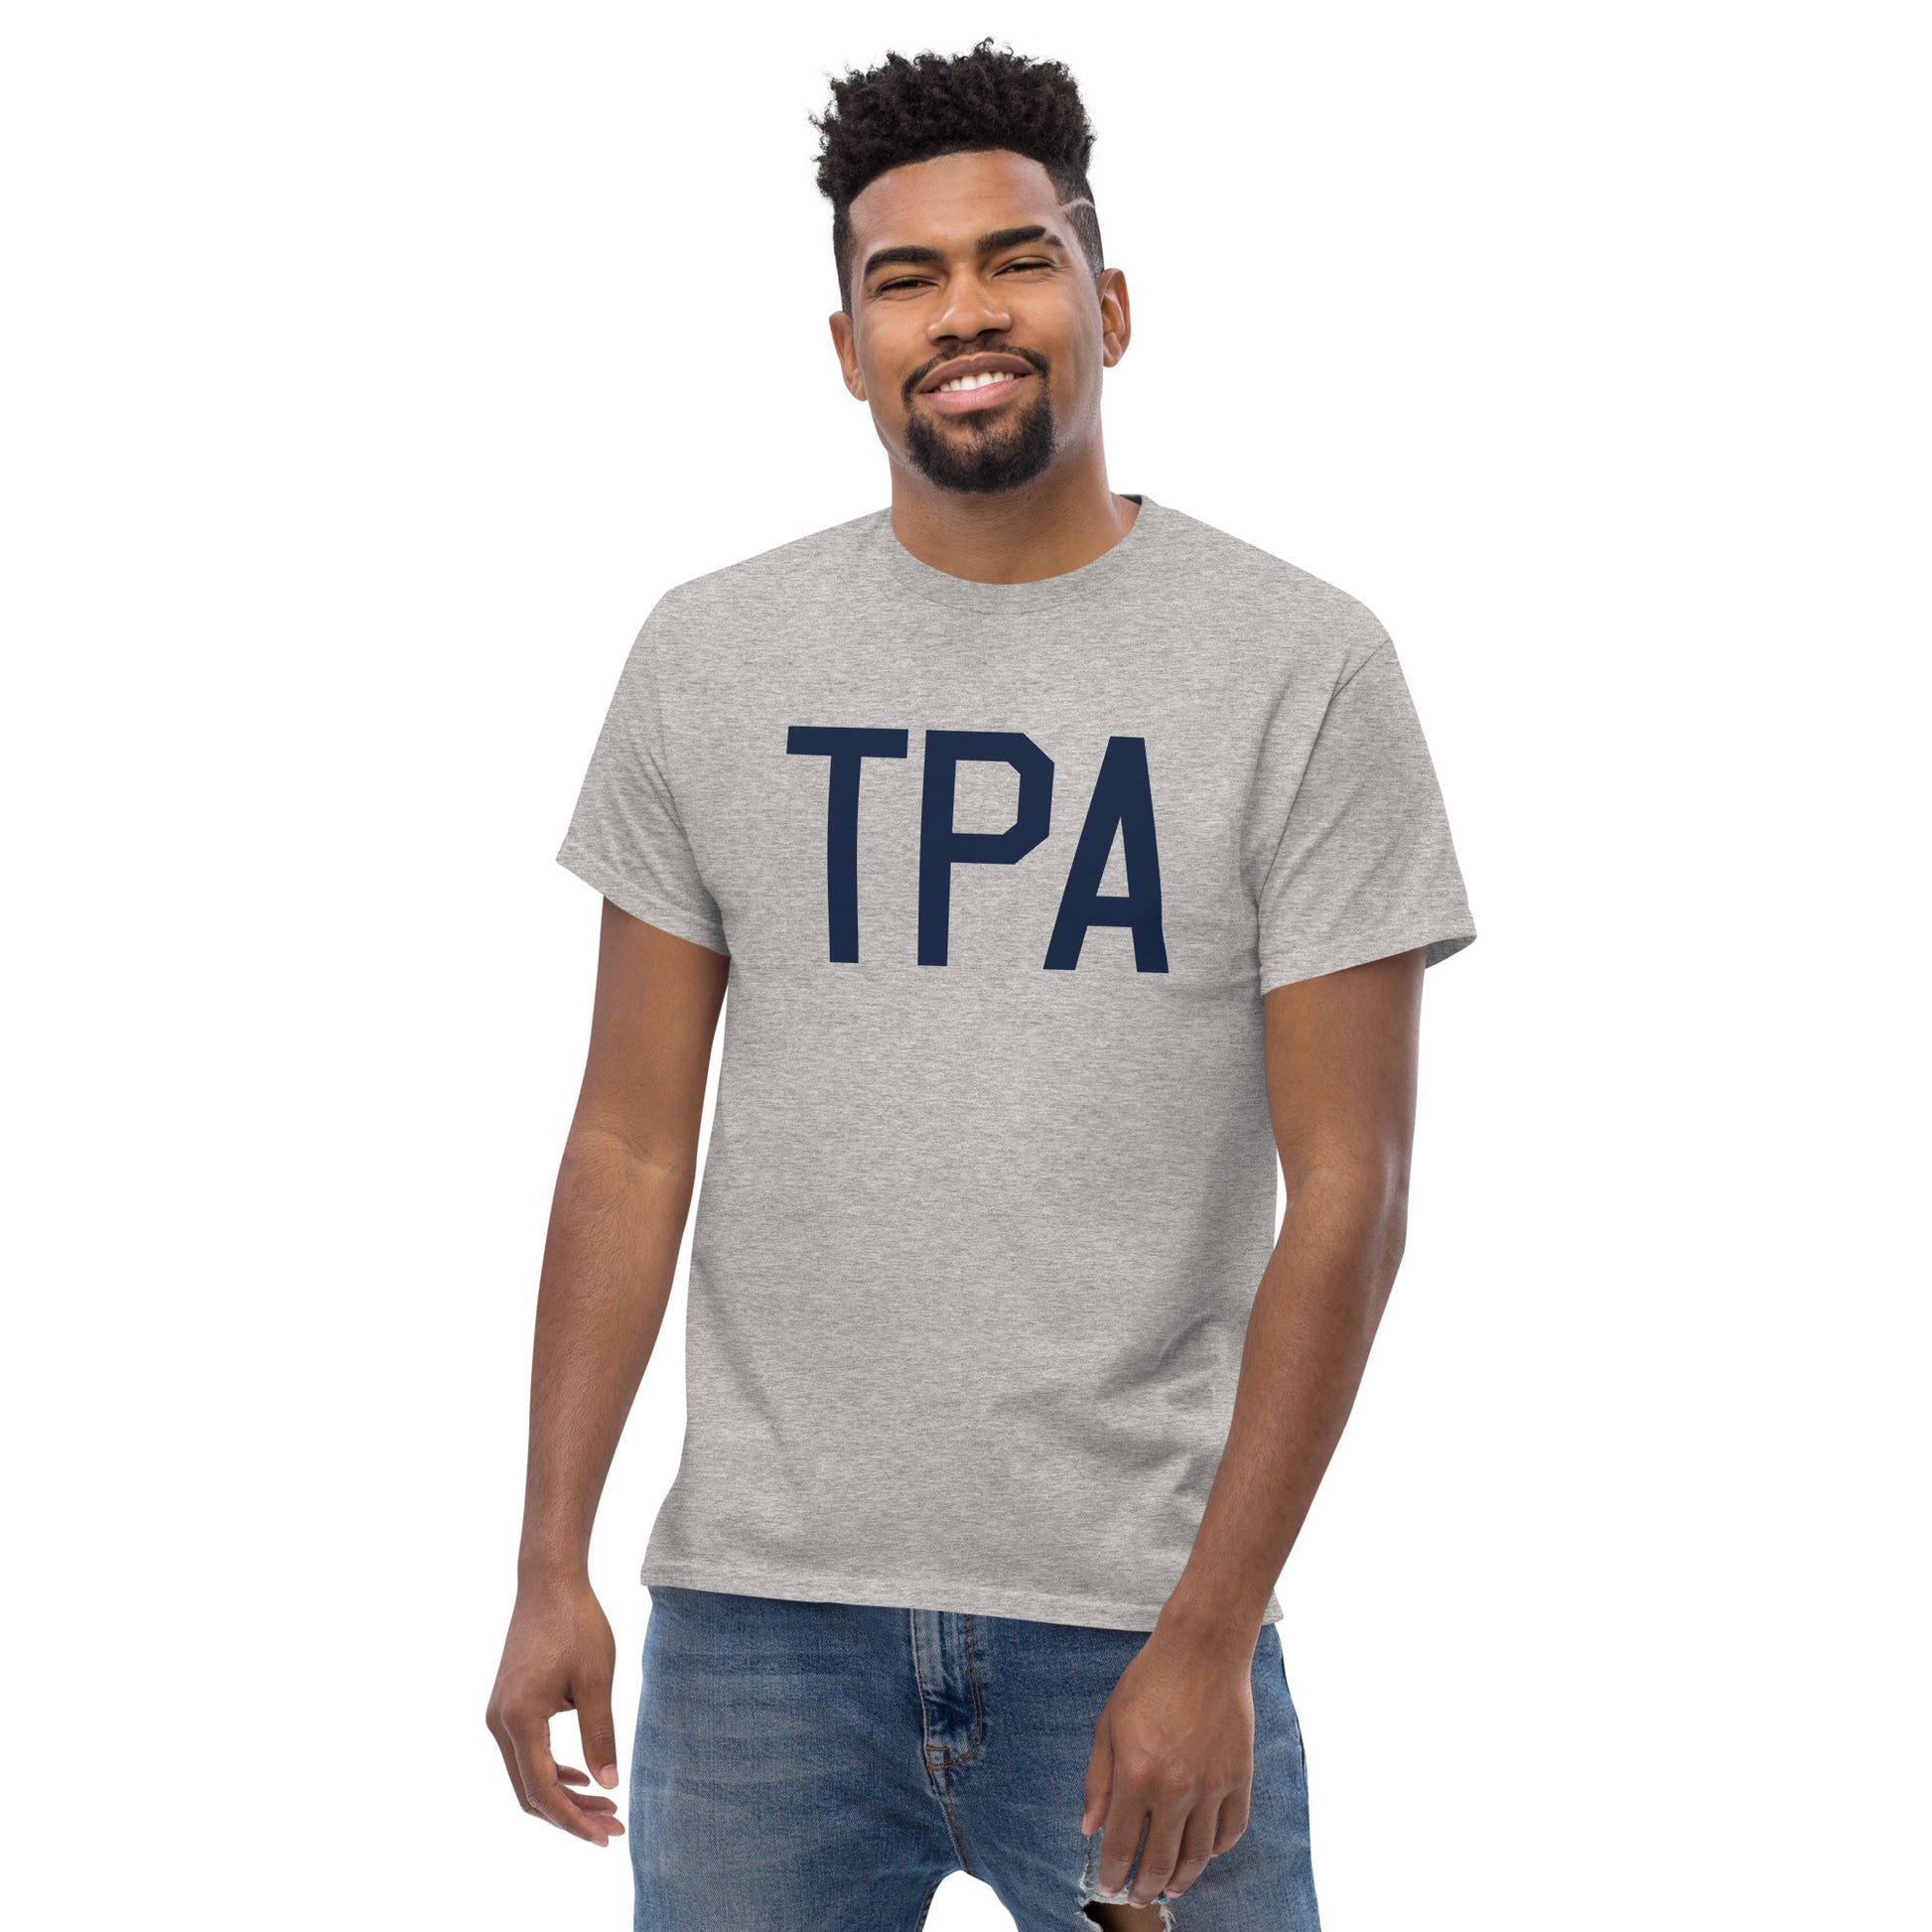 Aviation-Theme Men's T-Shirt - Navy Blue Graphic • TPA Tampa • YHM Designs - Image 06